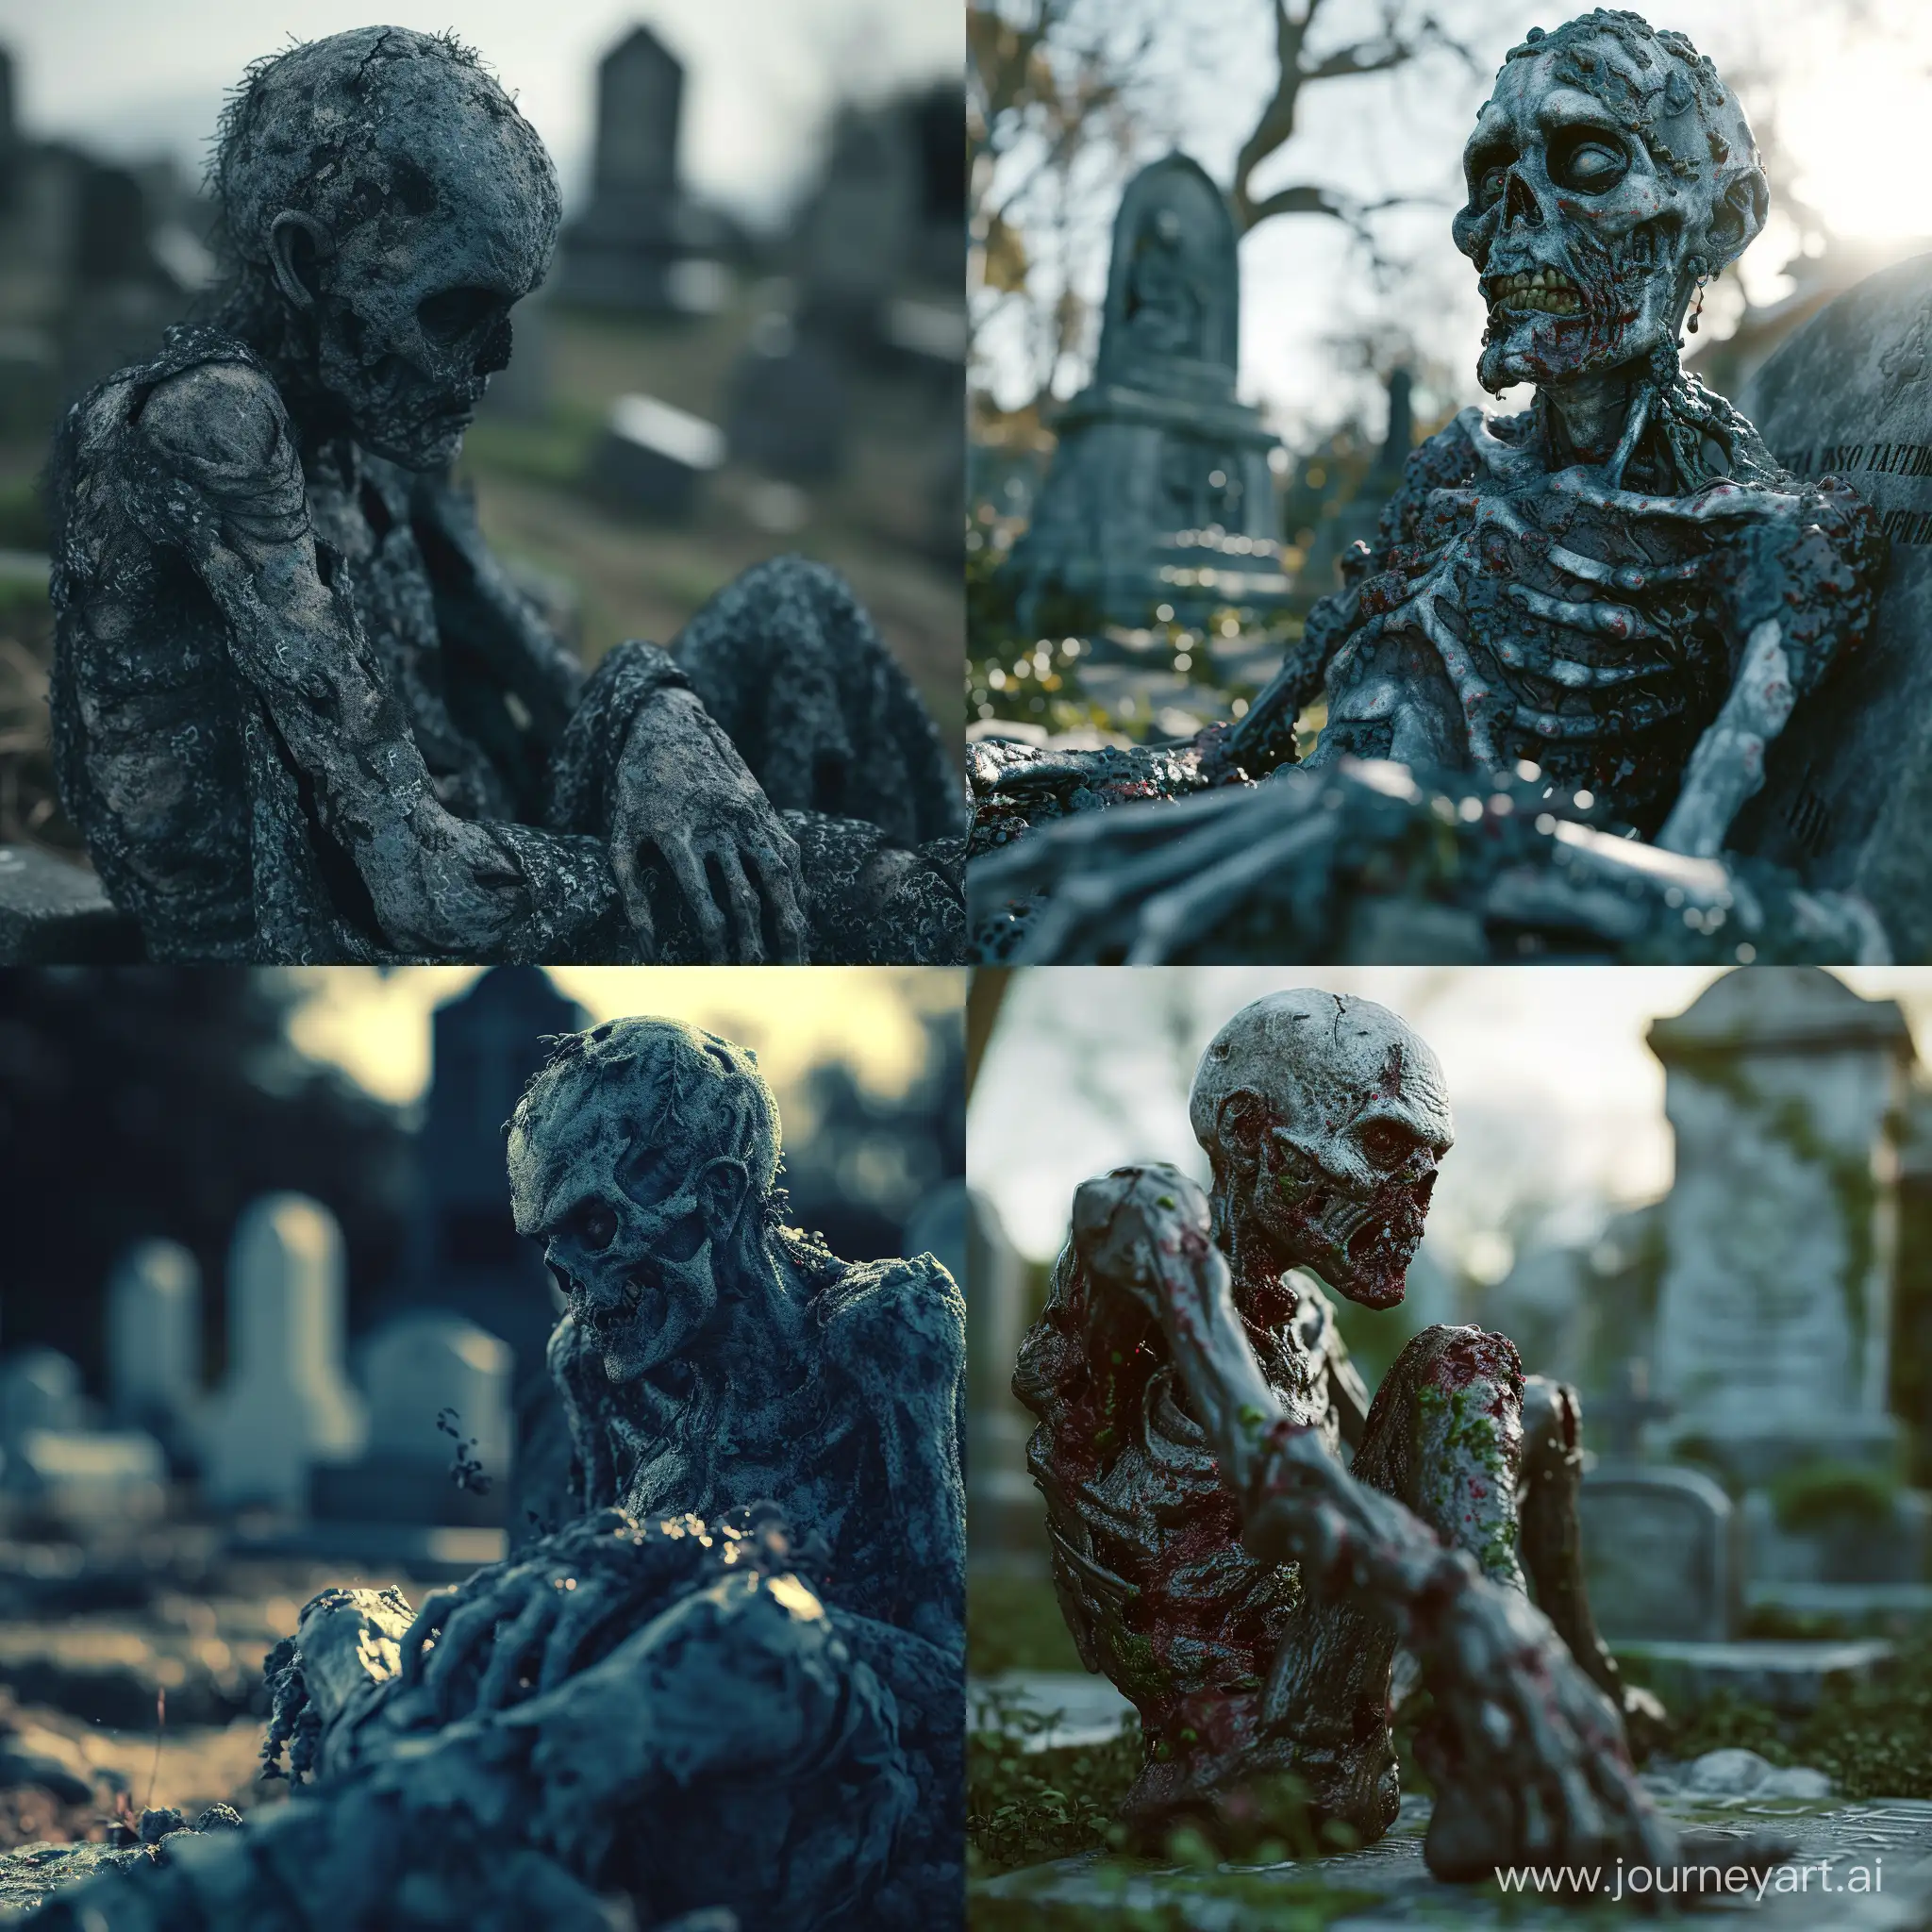 Detailed-8K-CloseUp-of-Zombie-Seated-in-Graveyard